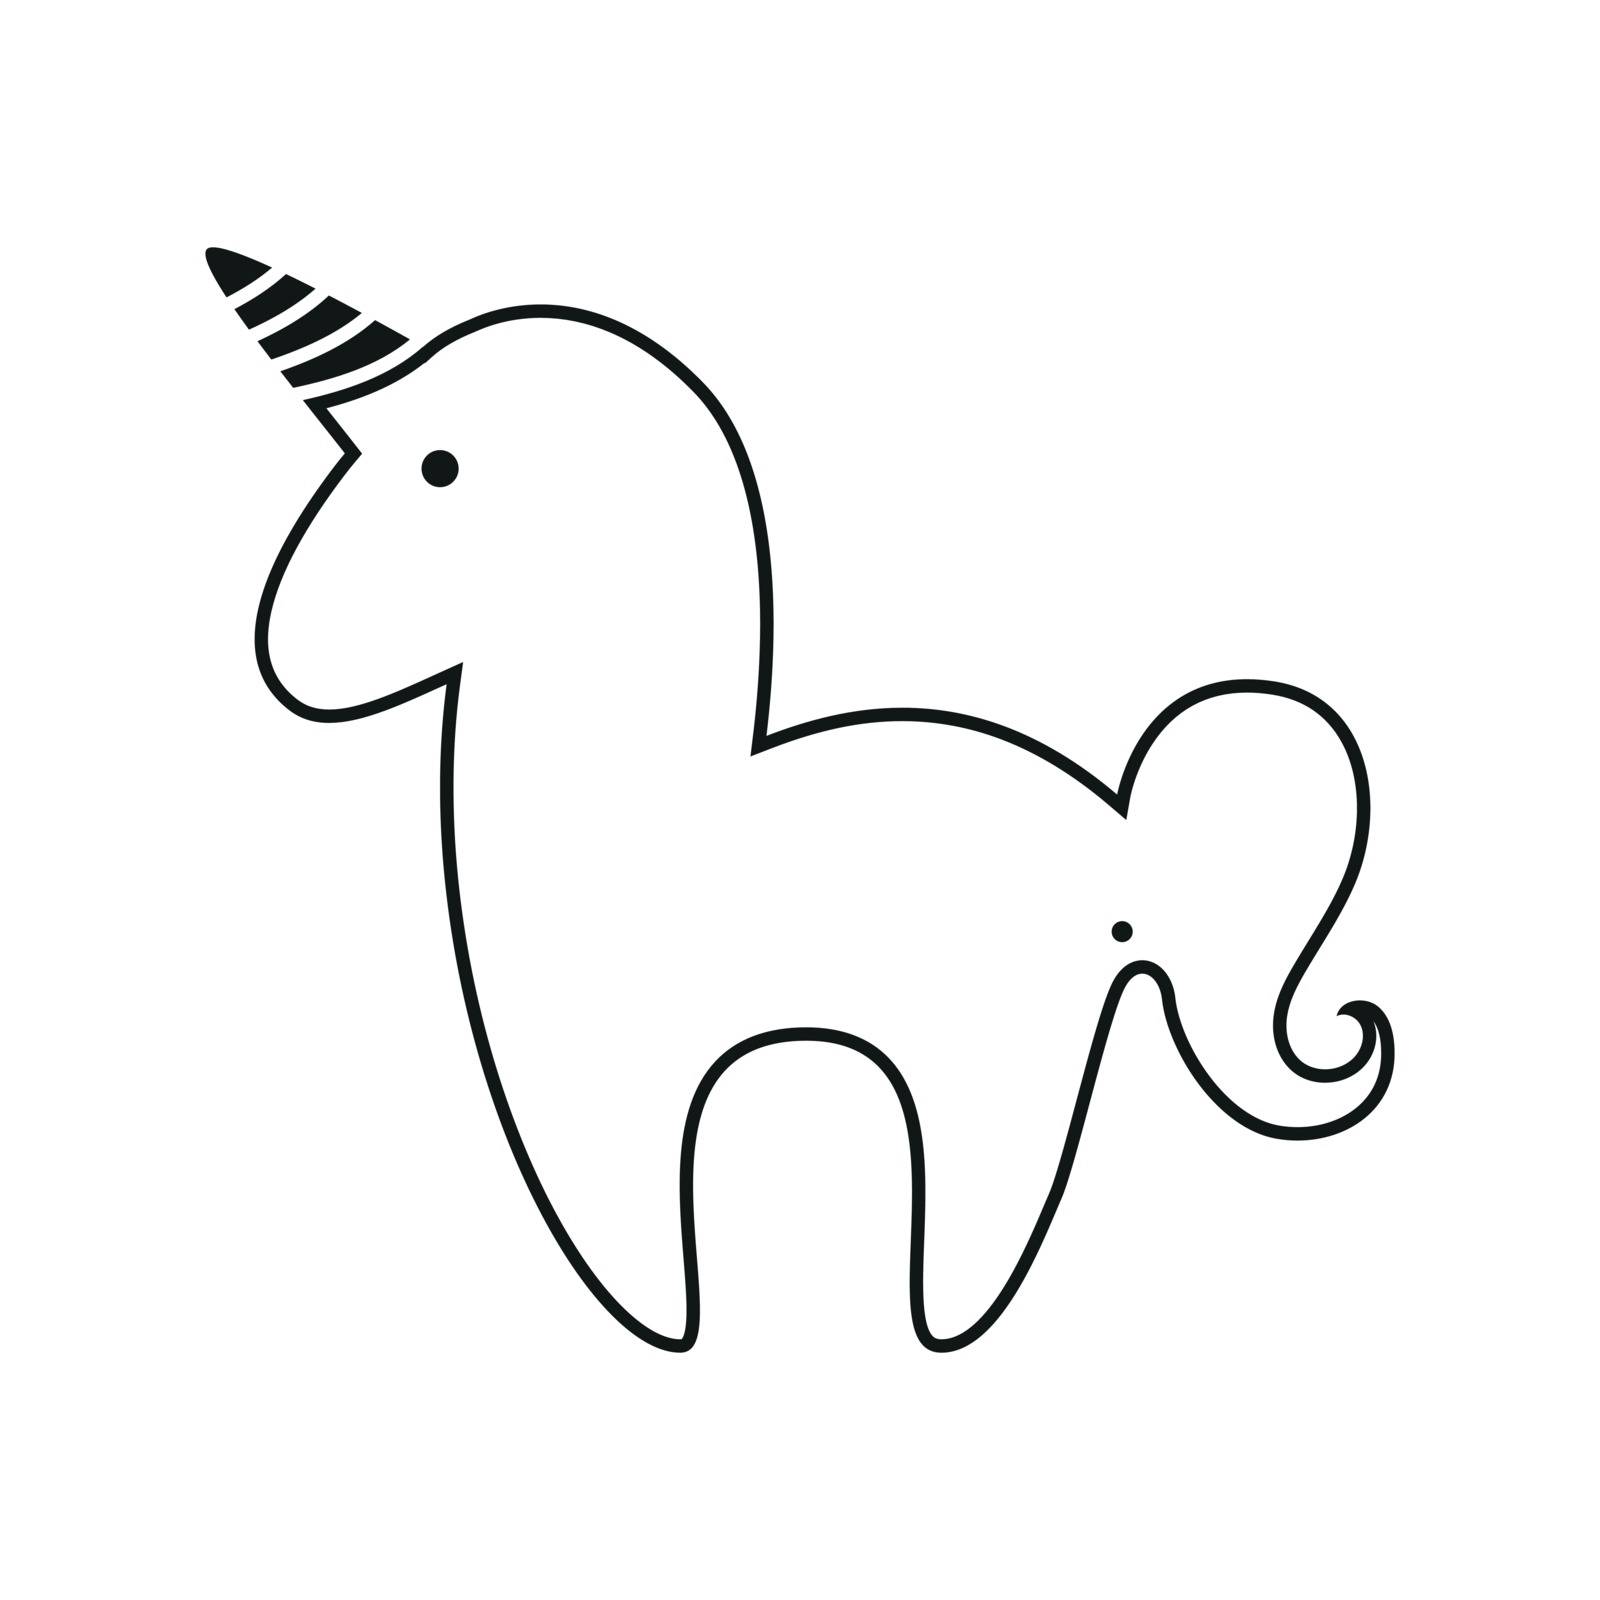 Unicorn. Magic horse with horn and wings. Unicorn silhouette on background. Vector illustration. 